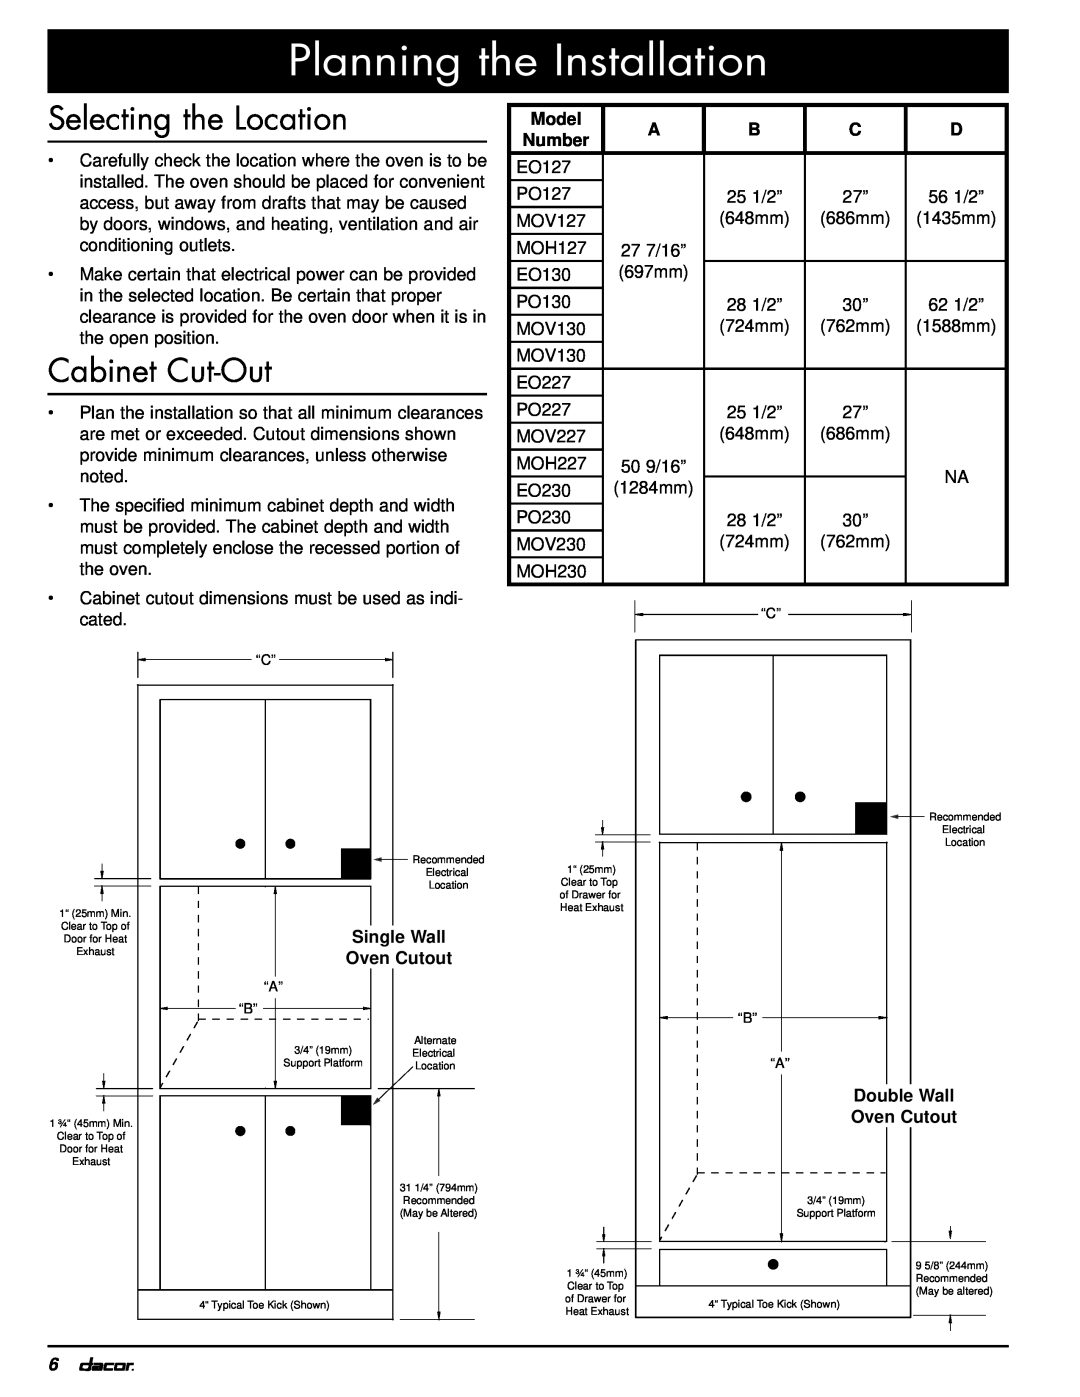 Dacor MOV230, MOH230 installation instructions Planning the Installation, Selecting the Location, Cabinet Cut-Out 